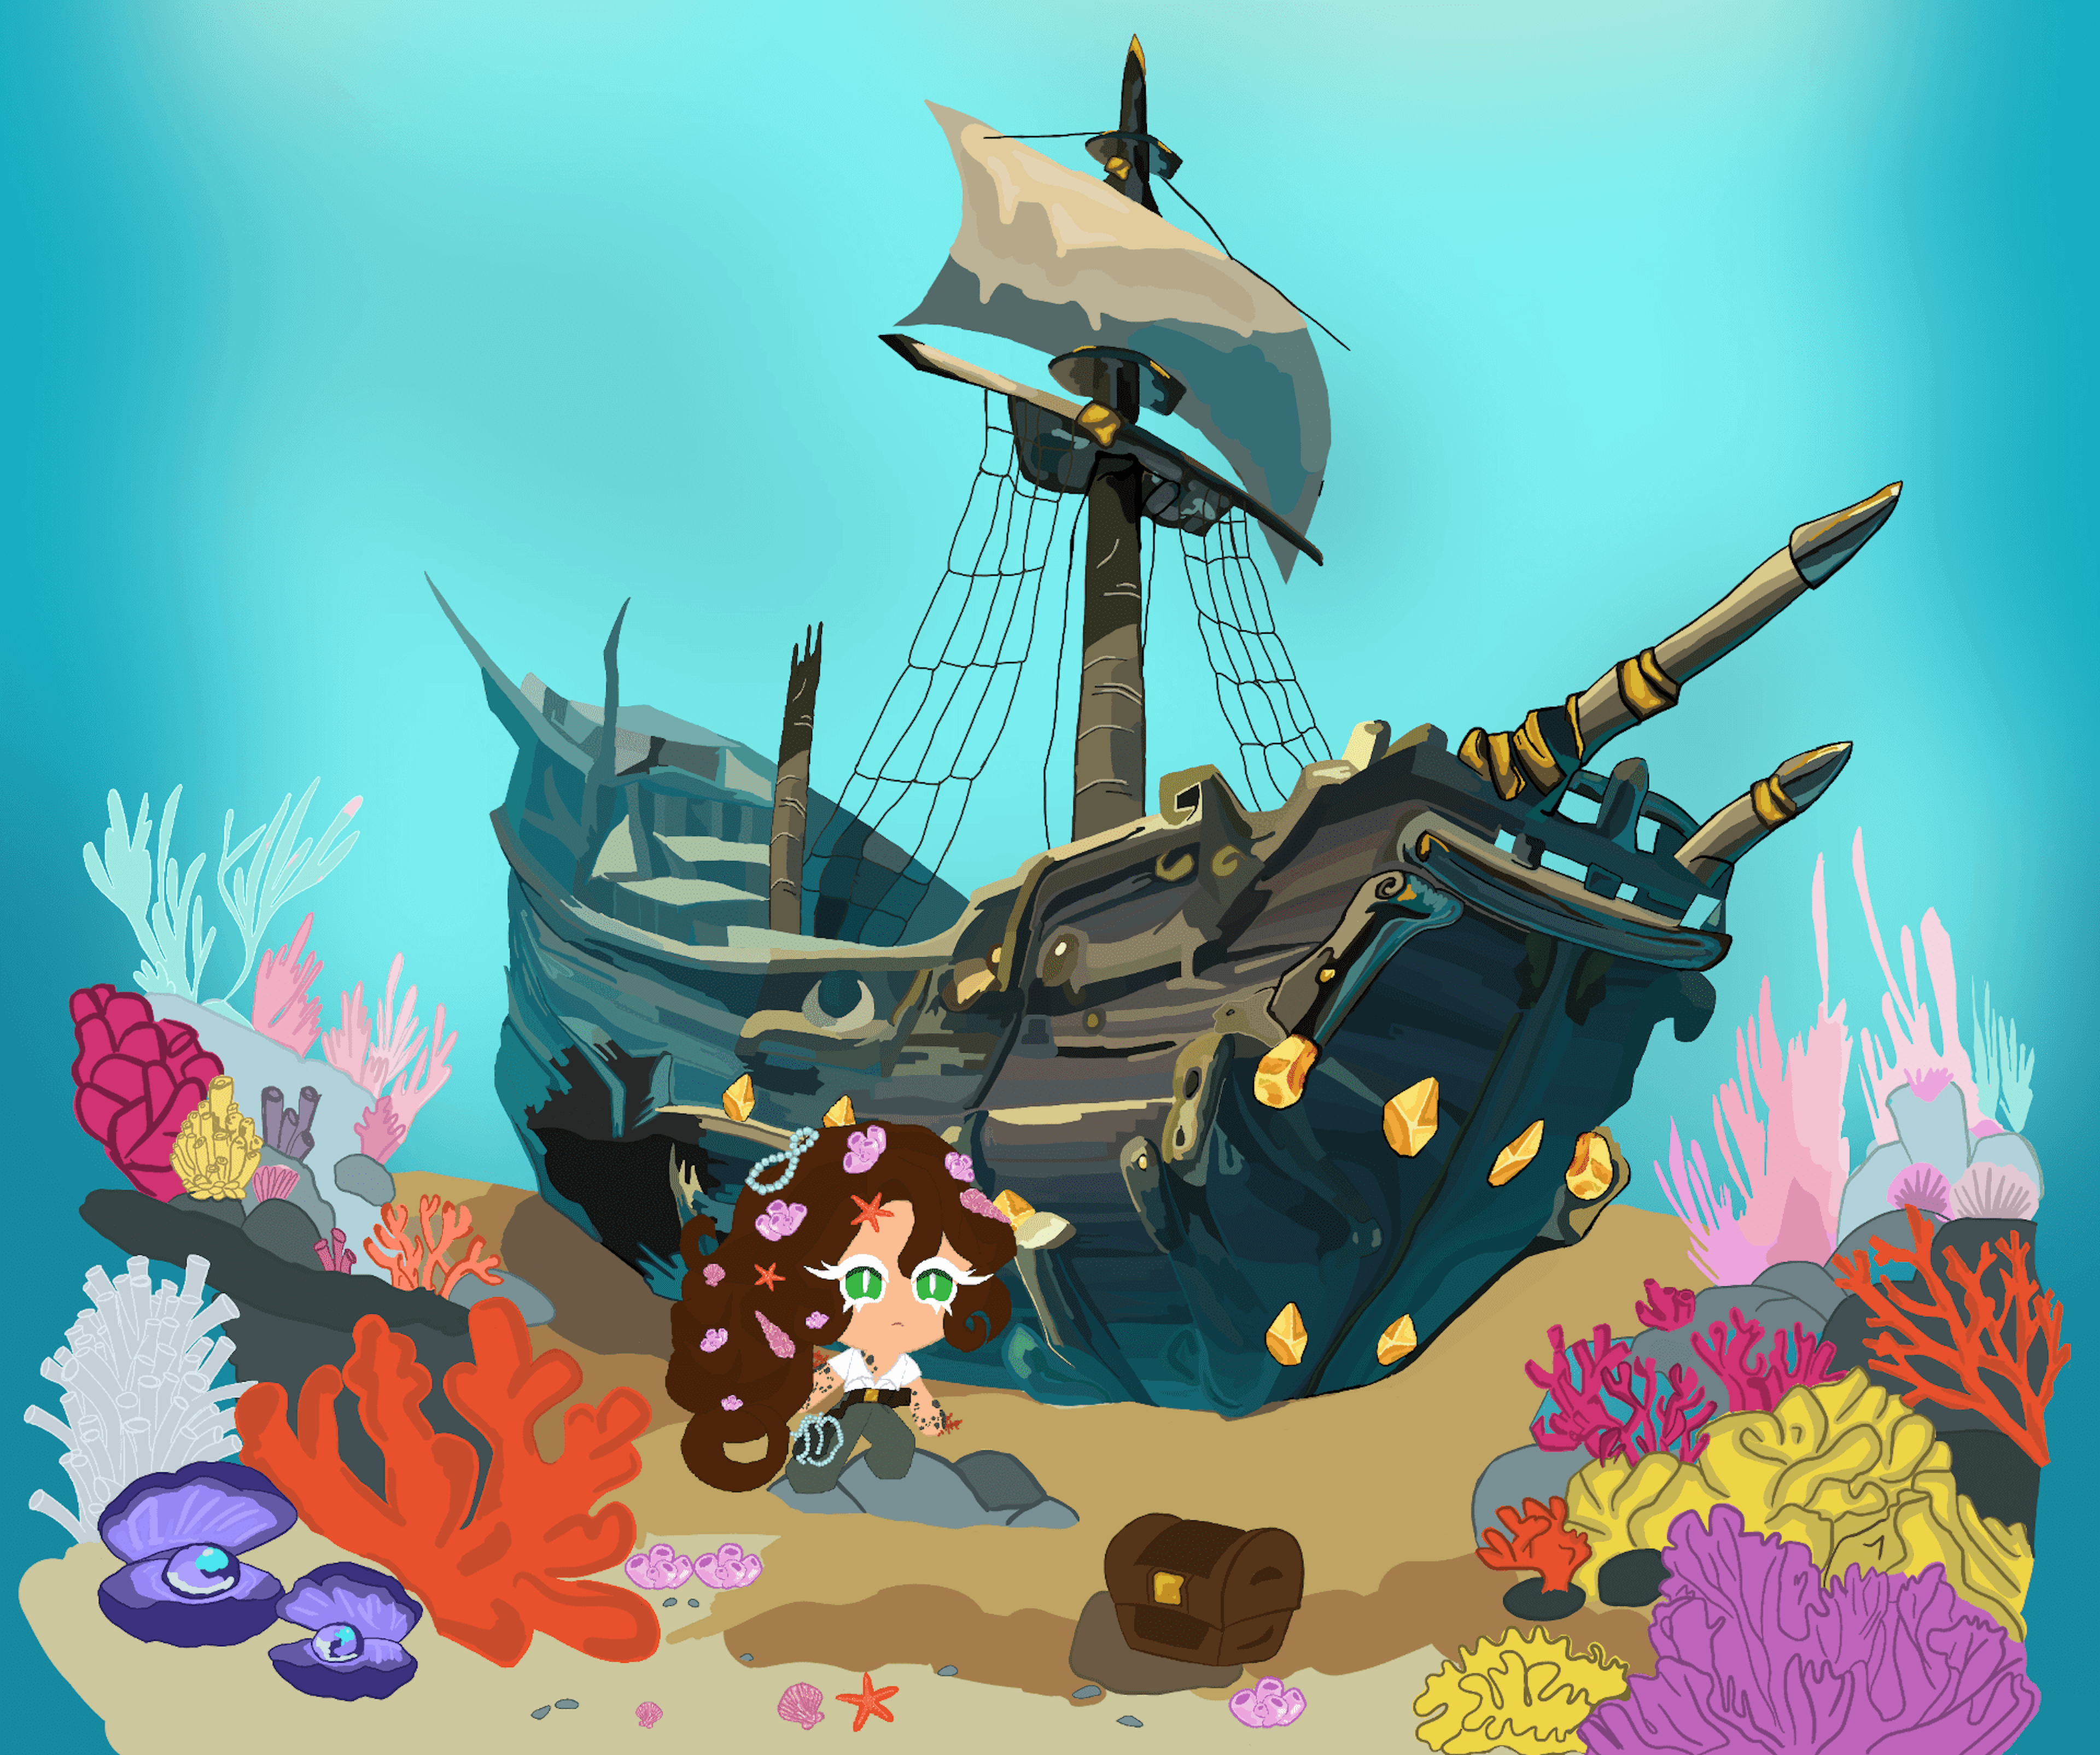 A cohesive design pairing featuring the Shipwreck Cookie character alongside their intricately crafted environment, highlighting the seamless integration of character and setting. This combination matches game styles, ensuring a consistent and immersive experience for players.